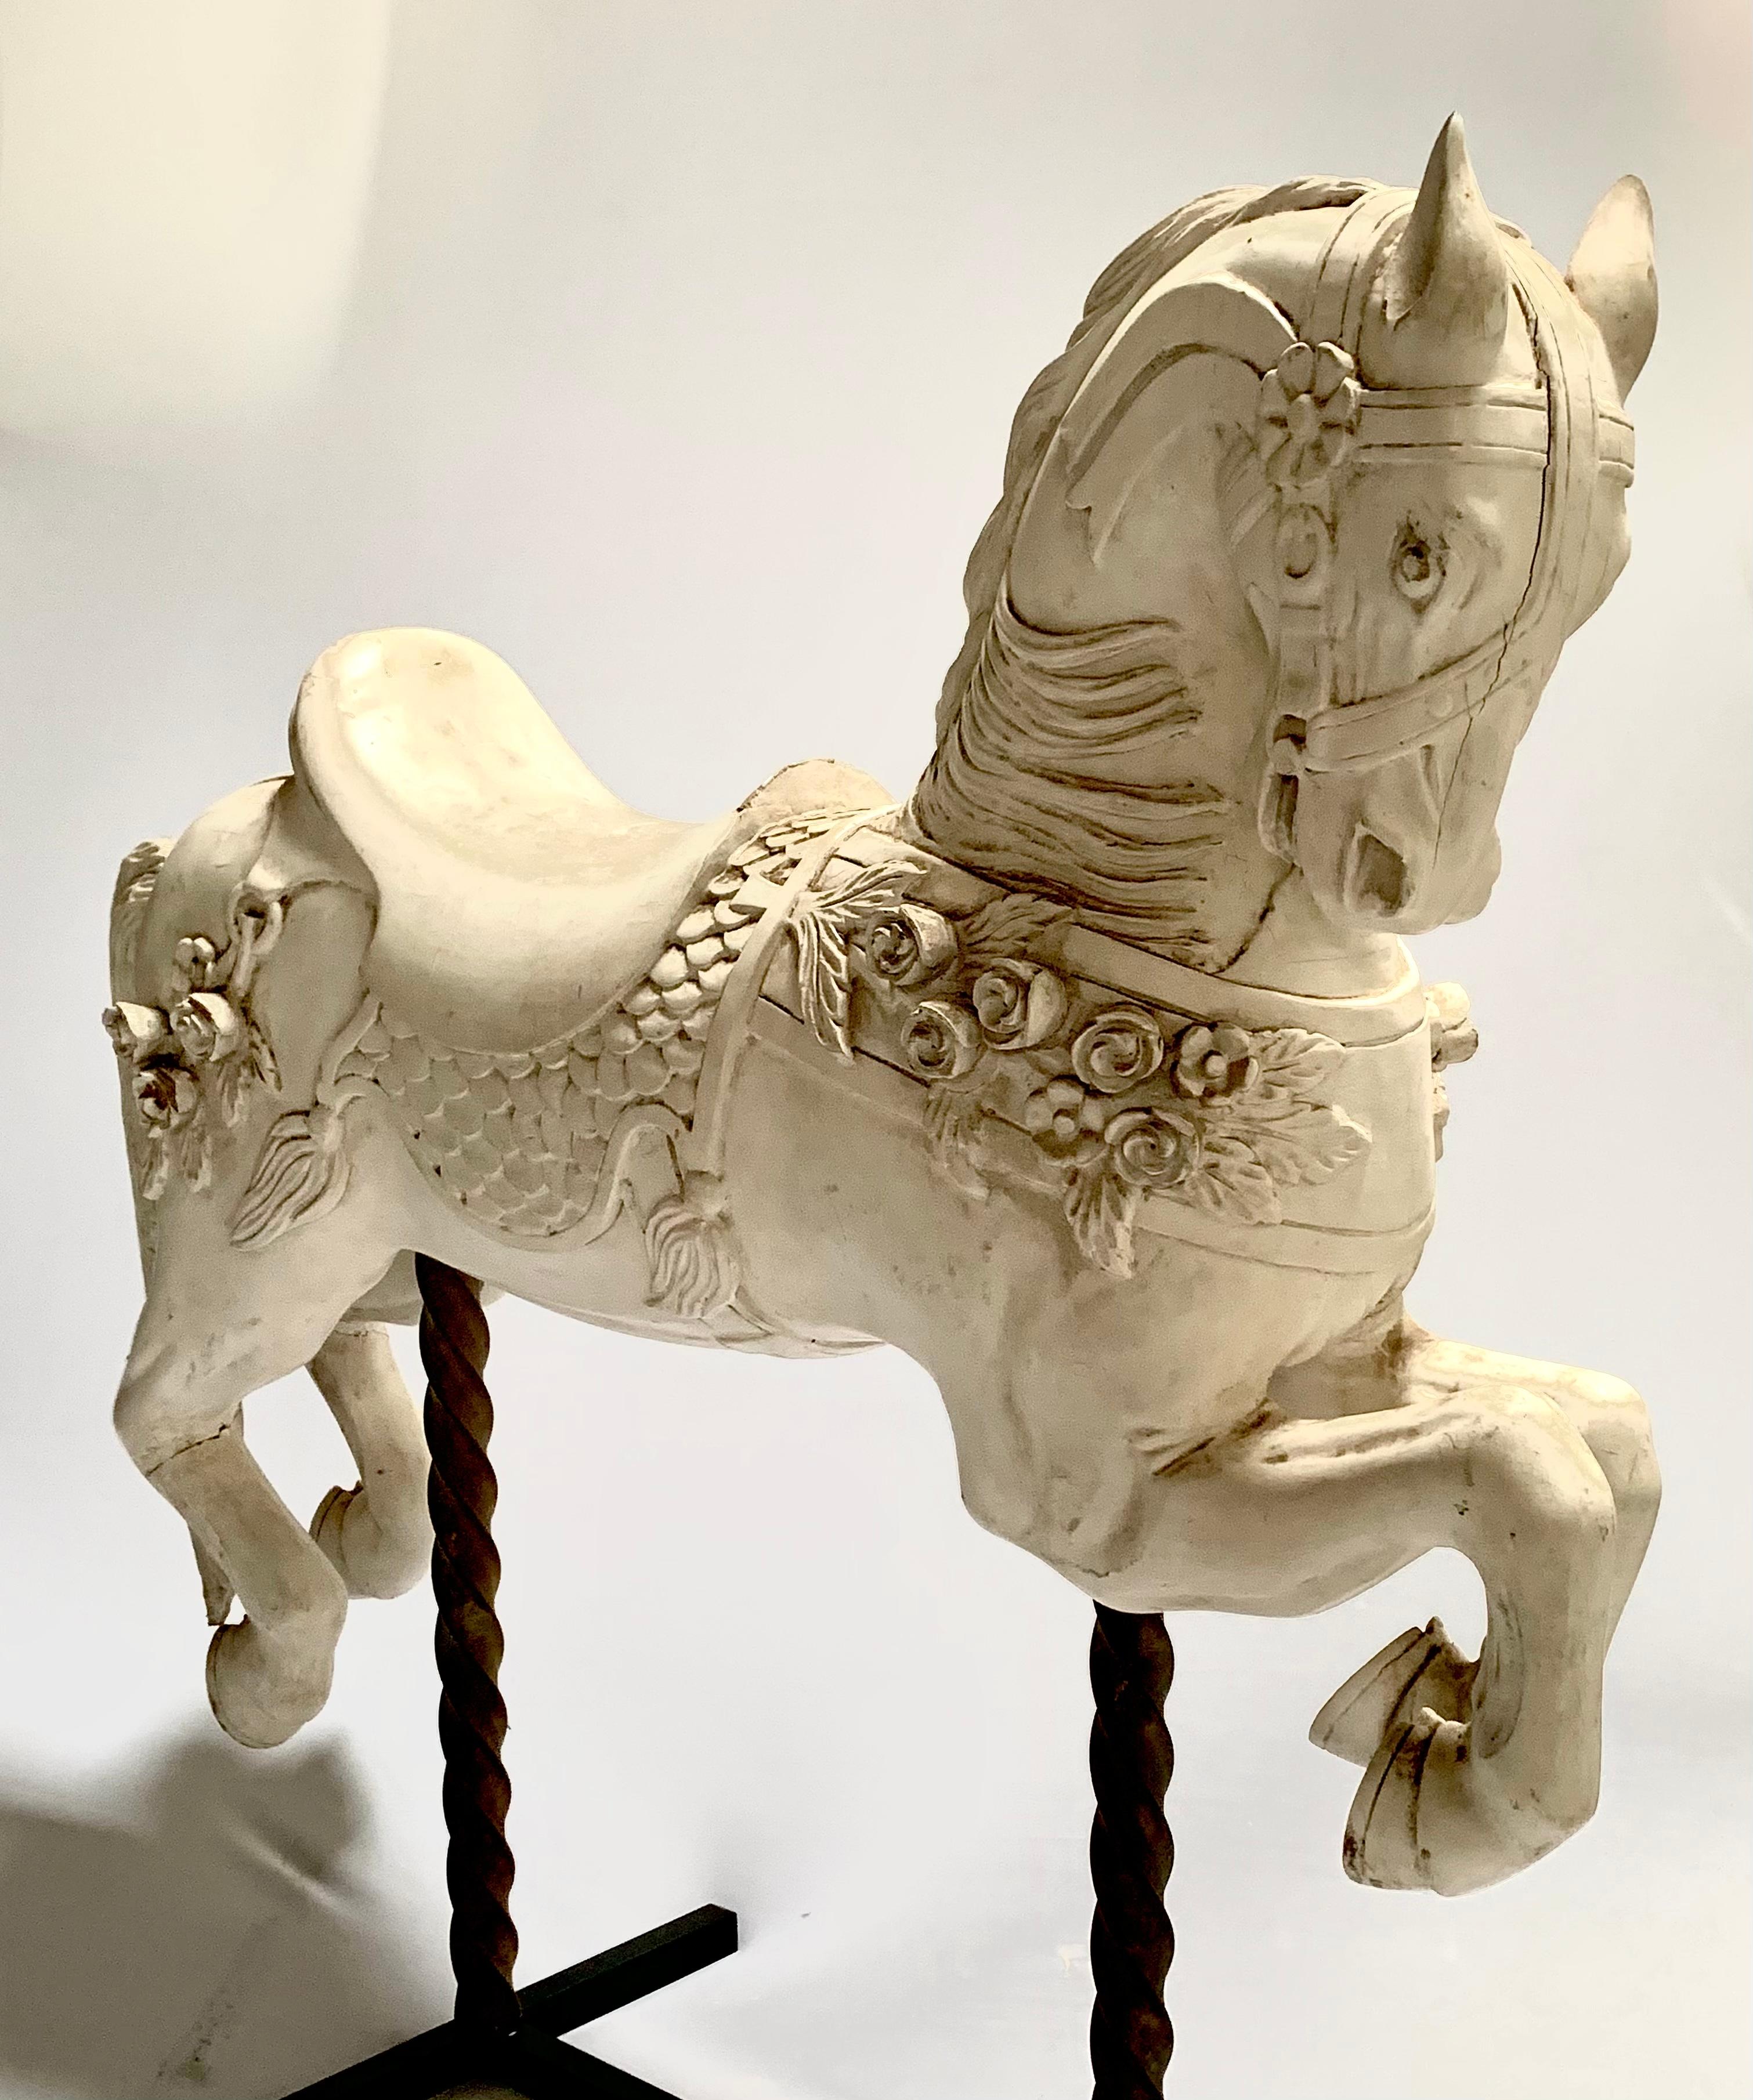 Carved wooden juvenile carousel horse adorned with roses. A similar horse is in operation on the Bushnell Park carousel.
Carved in the style of Charles Carmel who immigrated to the United States in 1883 where he settled in Brooklyn, New York.
Carmel